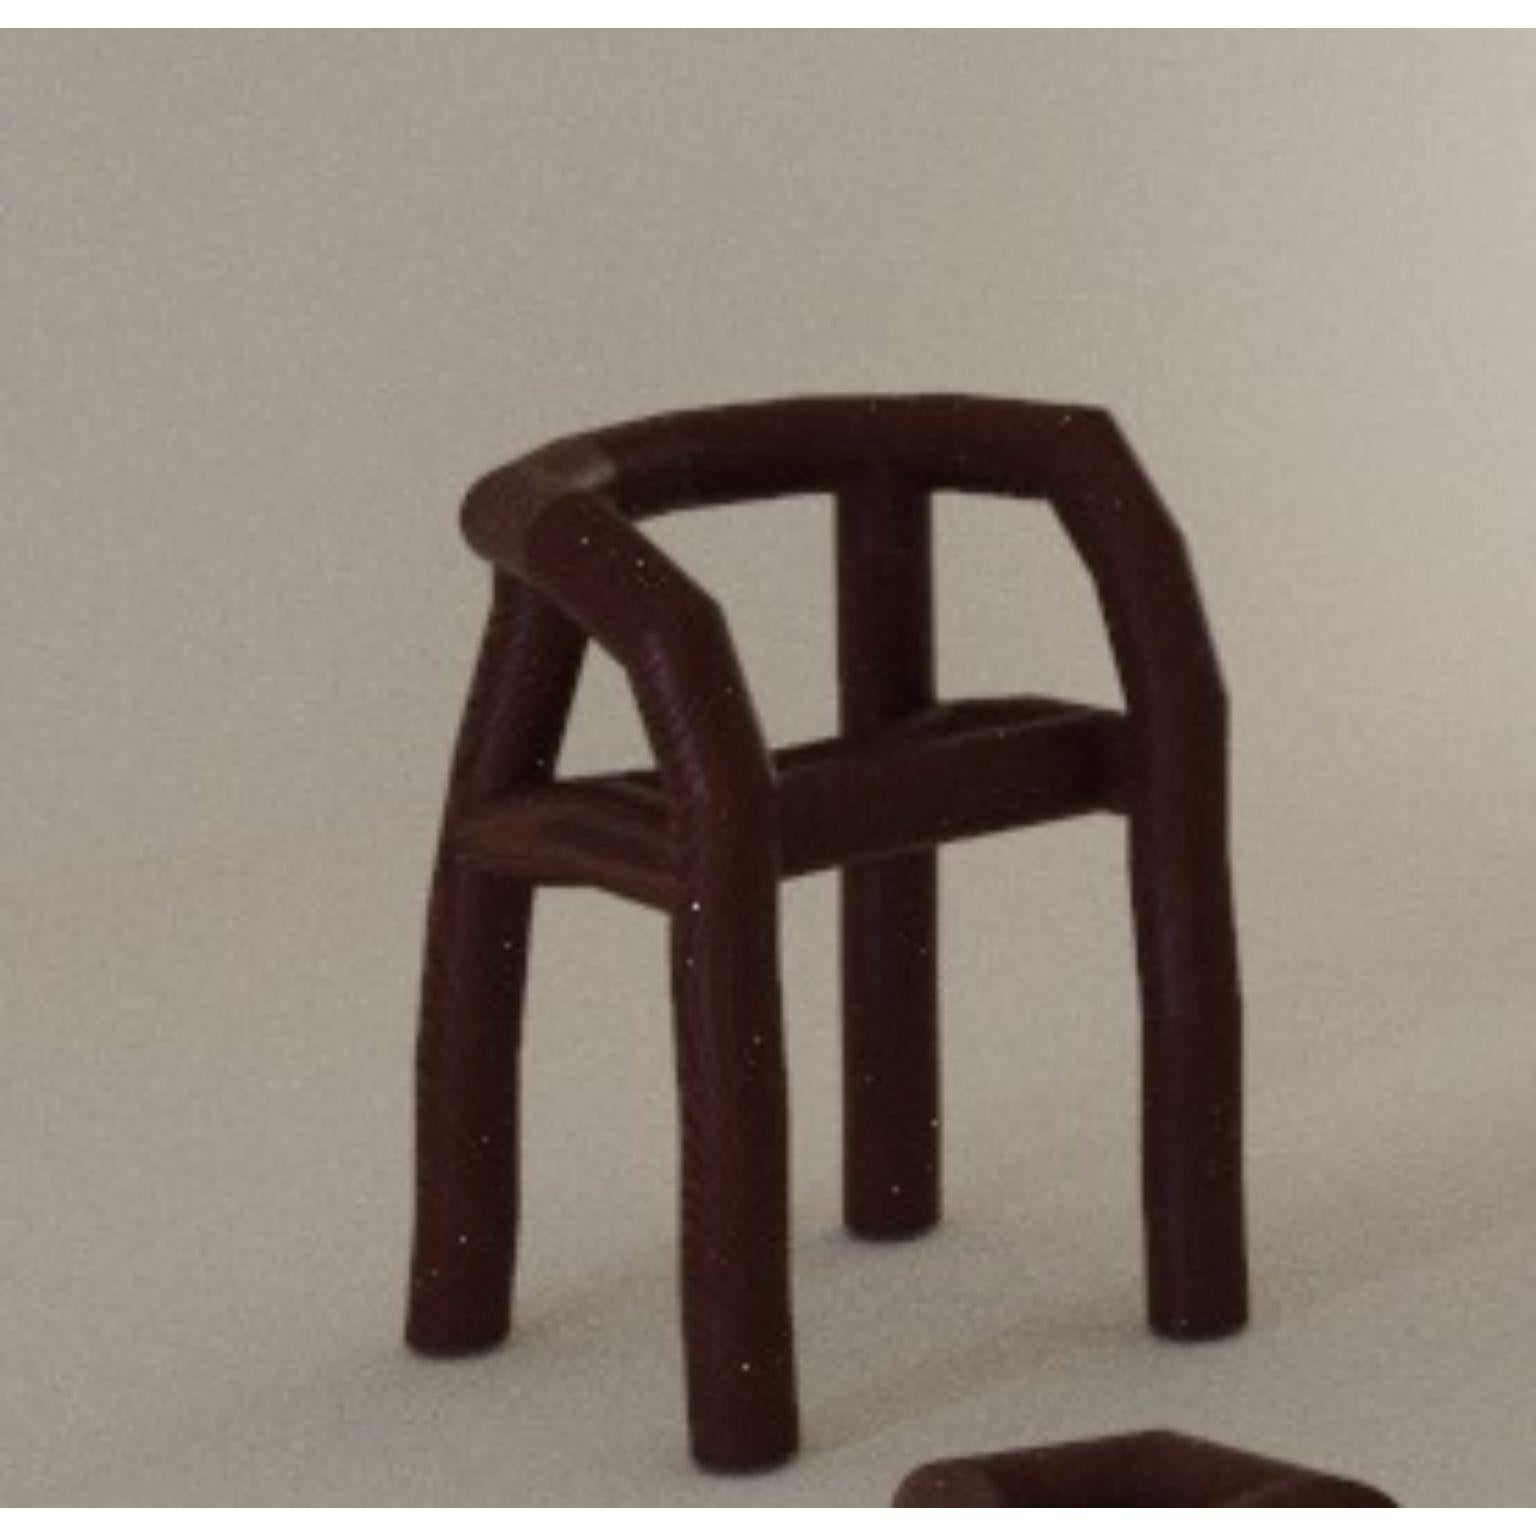 Segmento pine logs chair by Cara Davide
Dimensions: W70 x D60 x H 86 cm.
Materials: pine logs.
Color: dark brown.
Also available in light brown. 

Segmento perceives ordinary objects in an abstracted form through the act of breaking down and